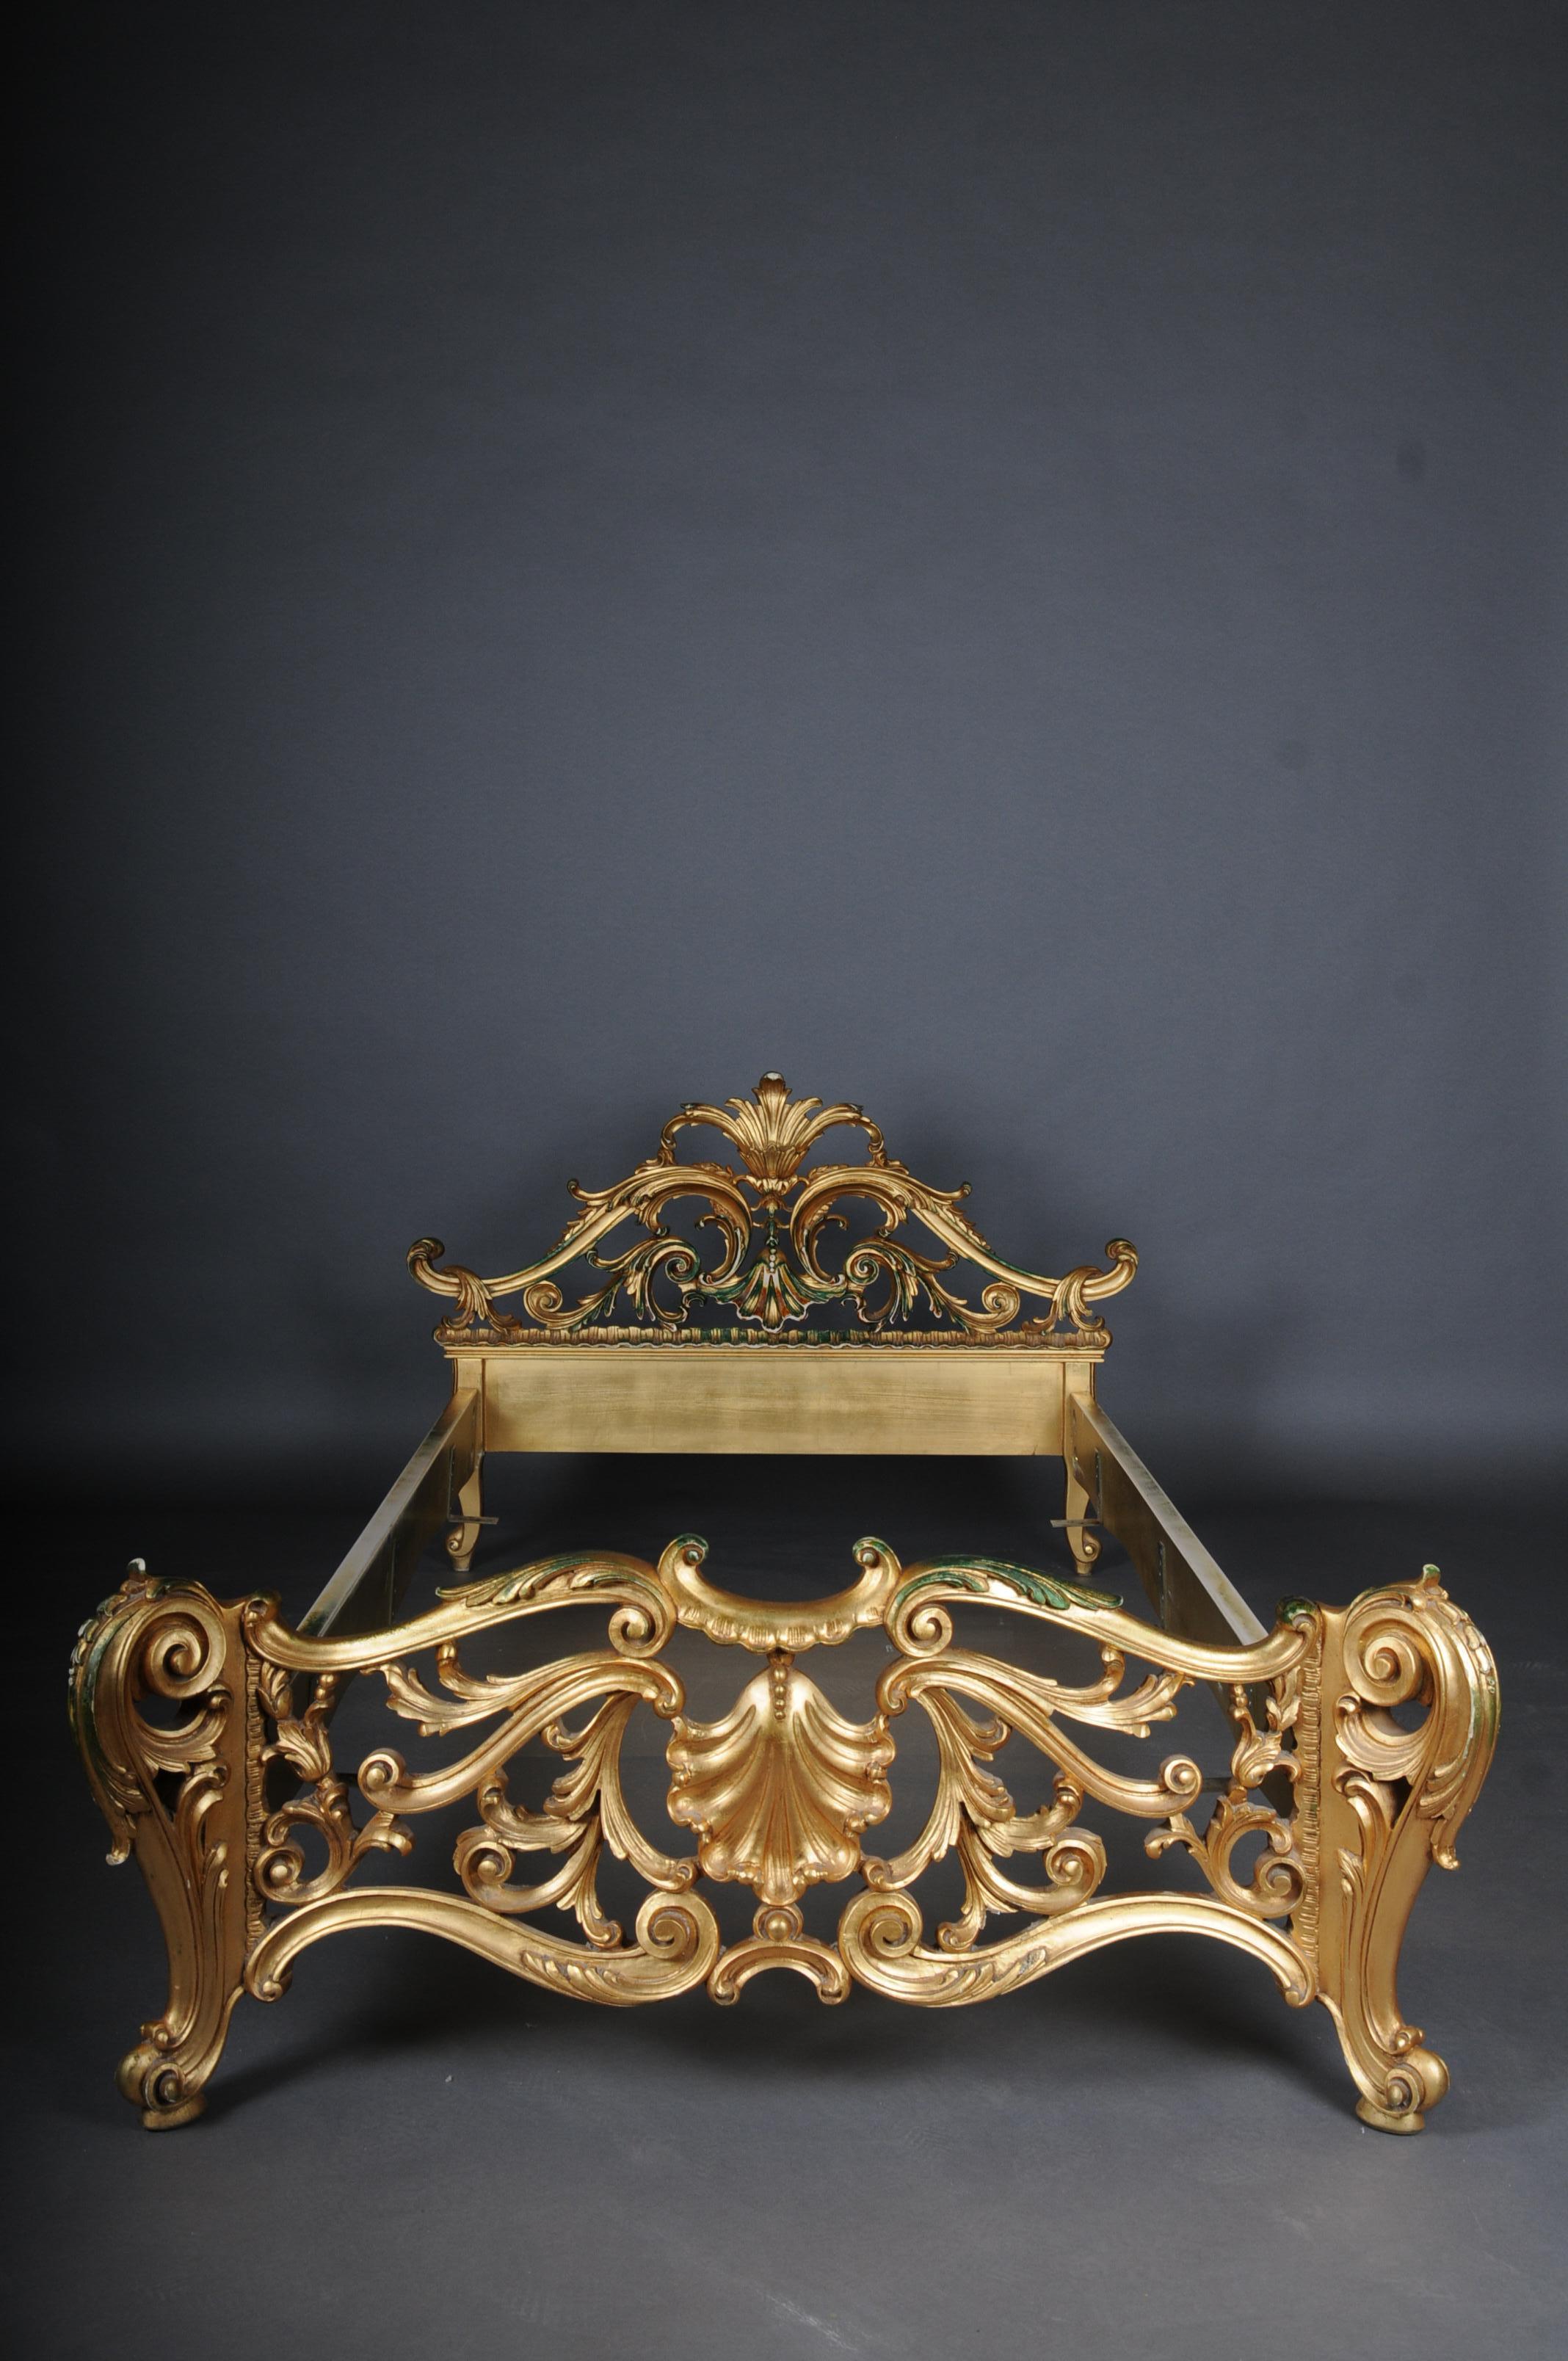 20th century antique French Louis XV bed, gold, Rococo

Impressive antique Louis XV single bed.
Wooden body, with rich and delicate hand-carved ornaments in the classic Louis XV style.

Curved and ornate body, gilded and patented.